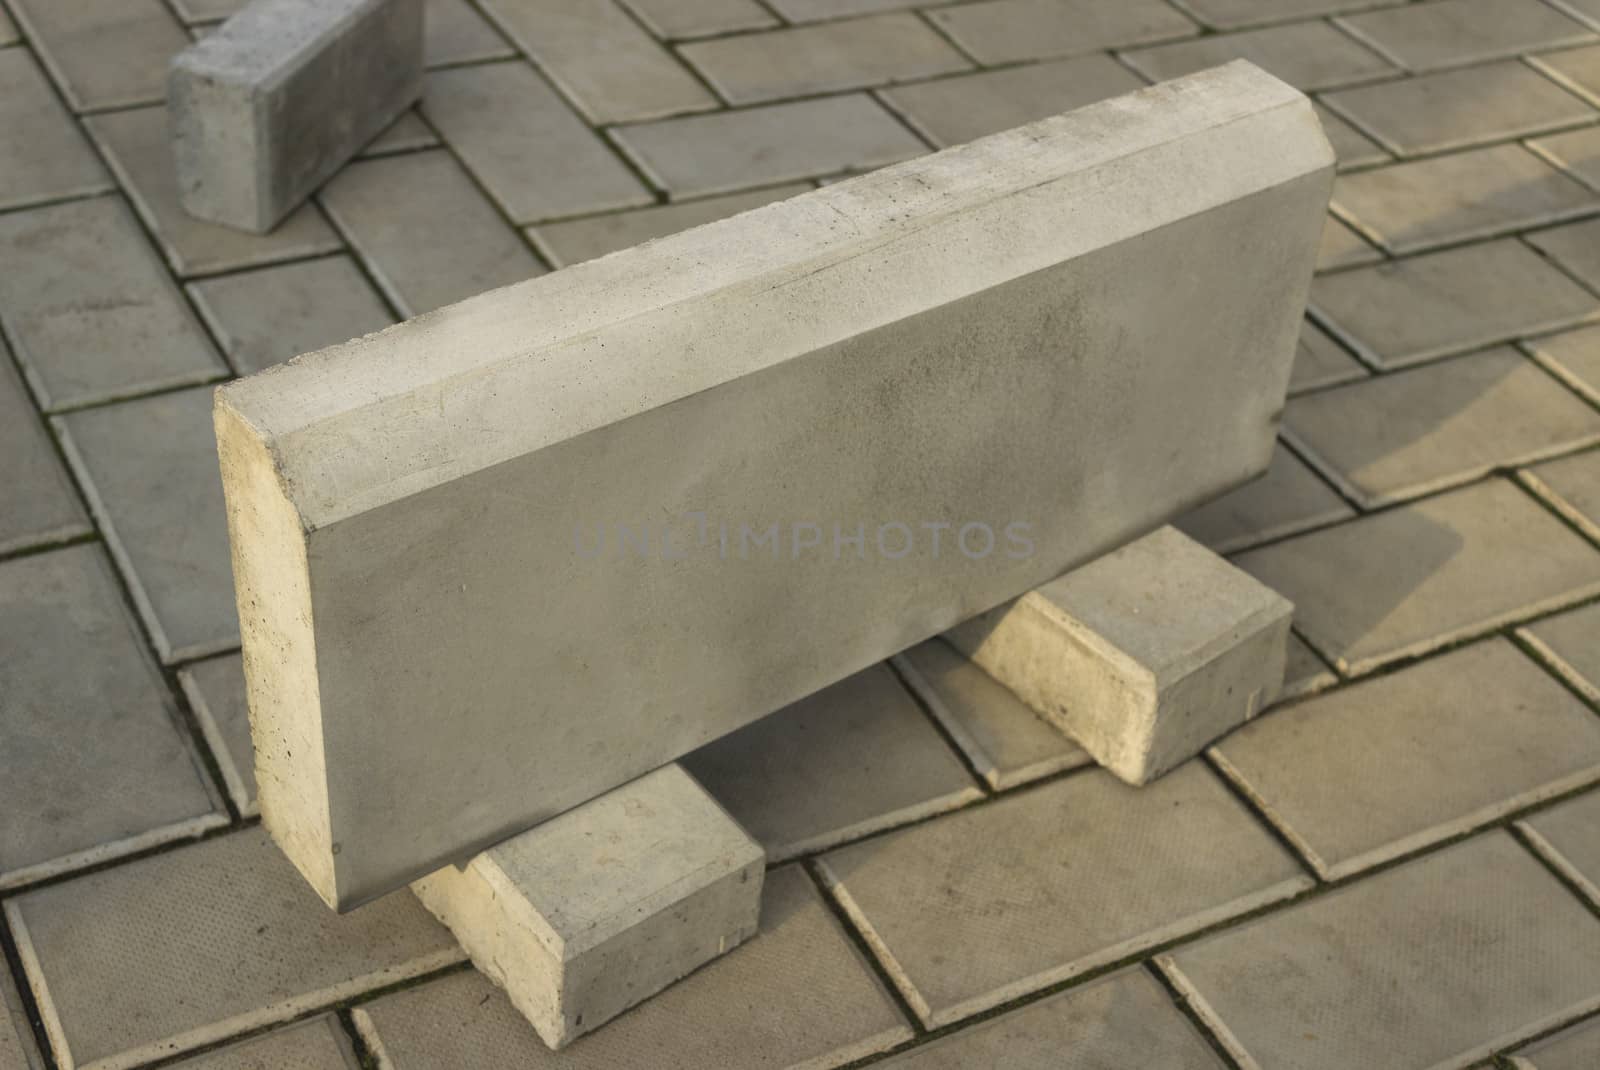 One large curb stone is made of concrete, on the stone floor